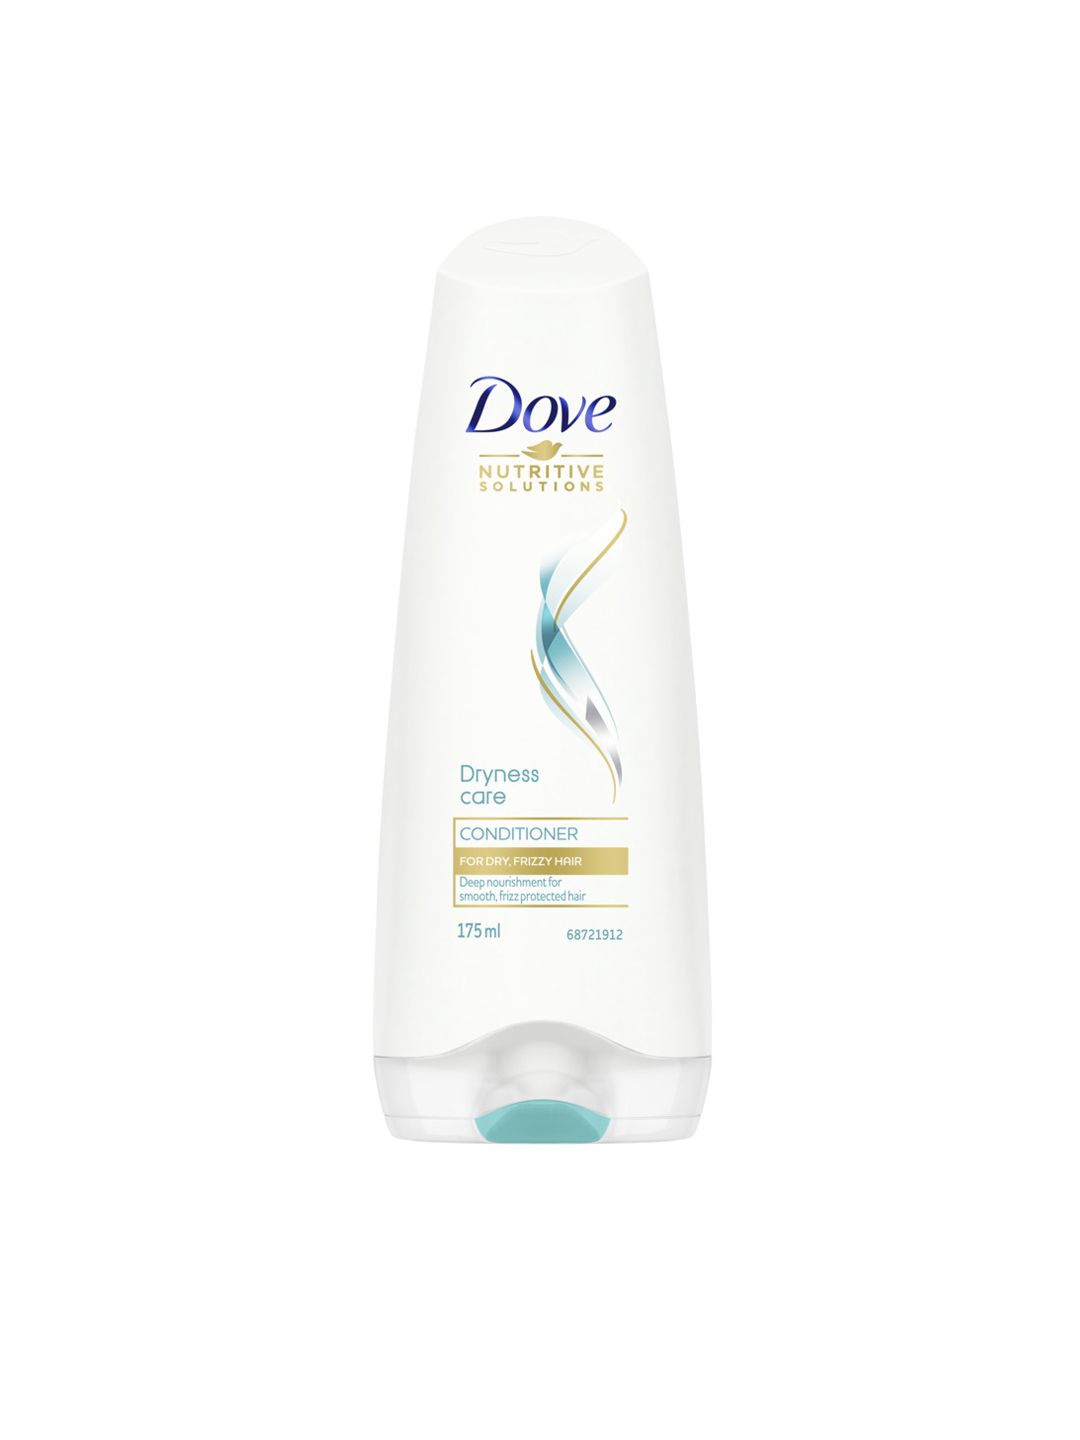 Dove Dryness Care Hair Conditioner, For Dry & Frizzy Hair, Restores Smoothness, 175 ml Price in India